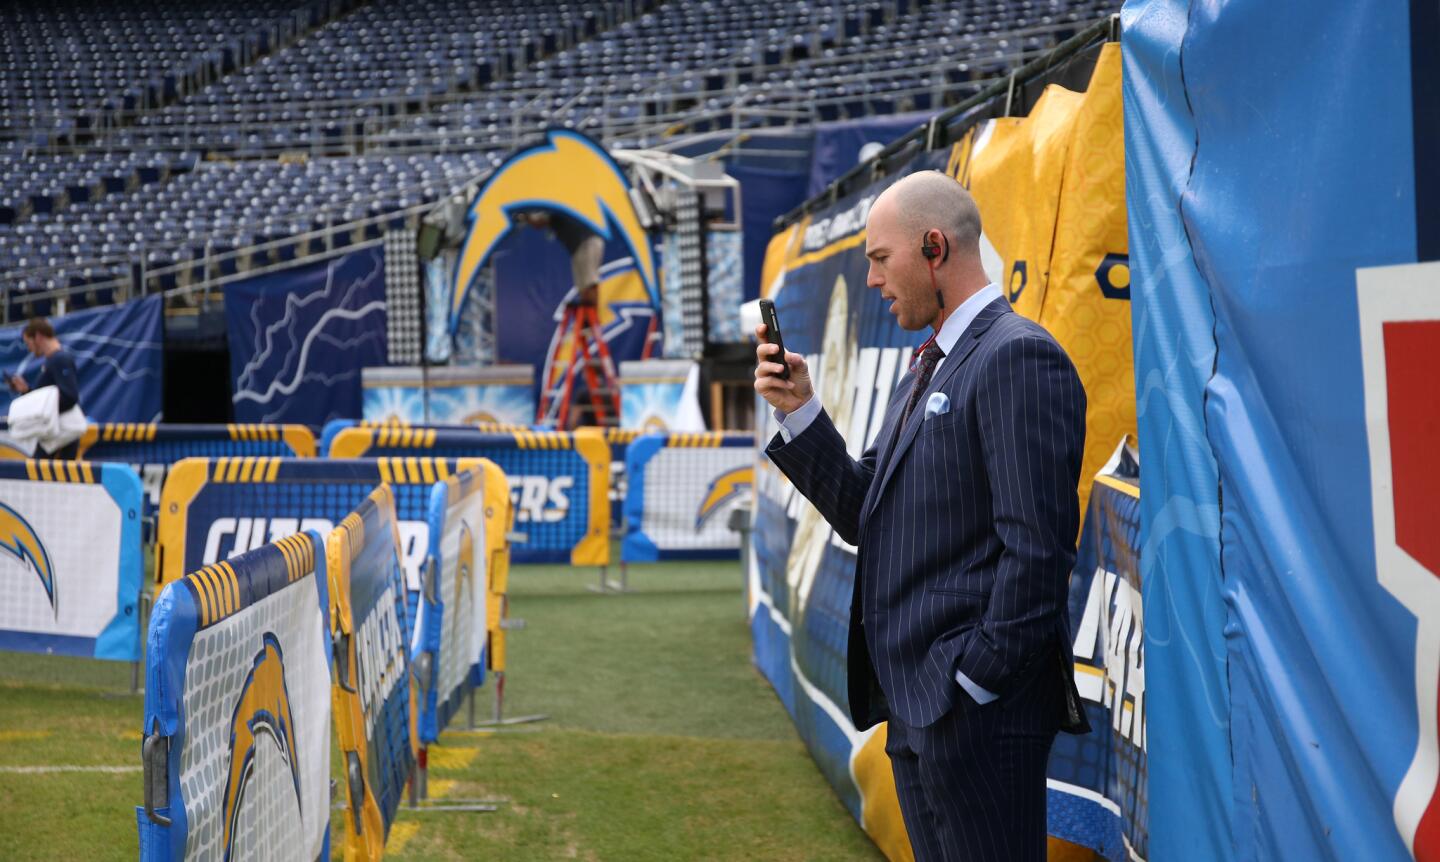 Bears kicker Robbie Gould takes a look at the field before the game at Qualcomm Stadium.